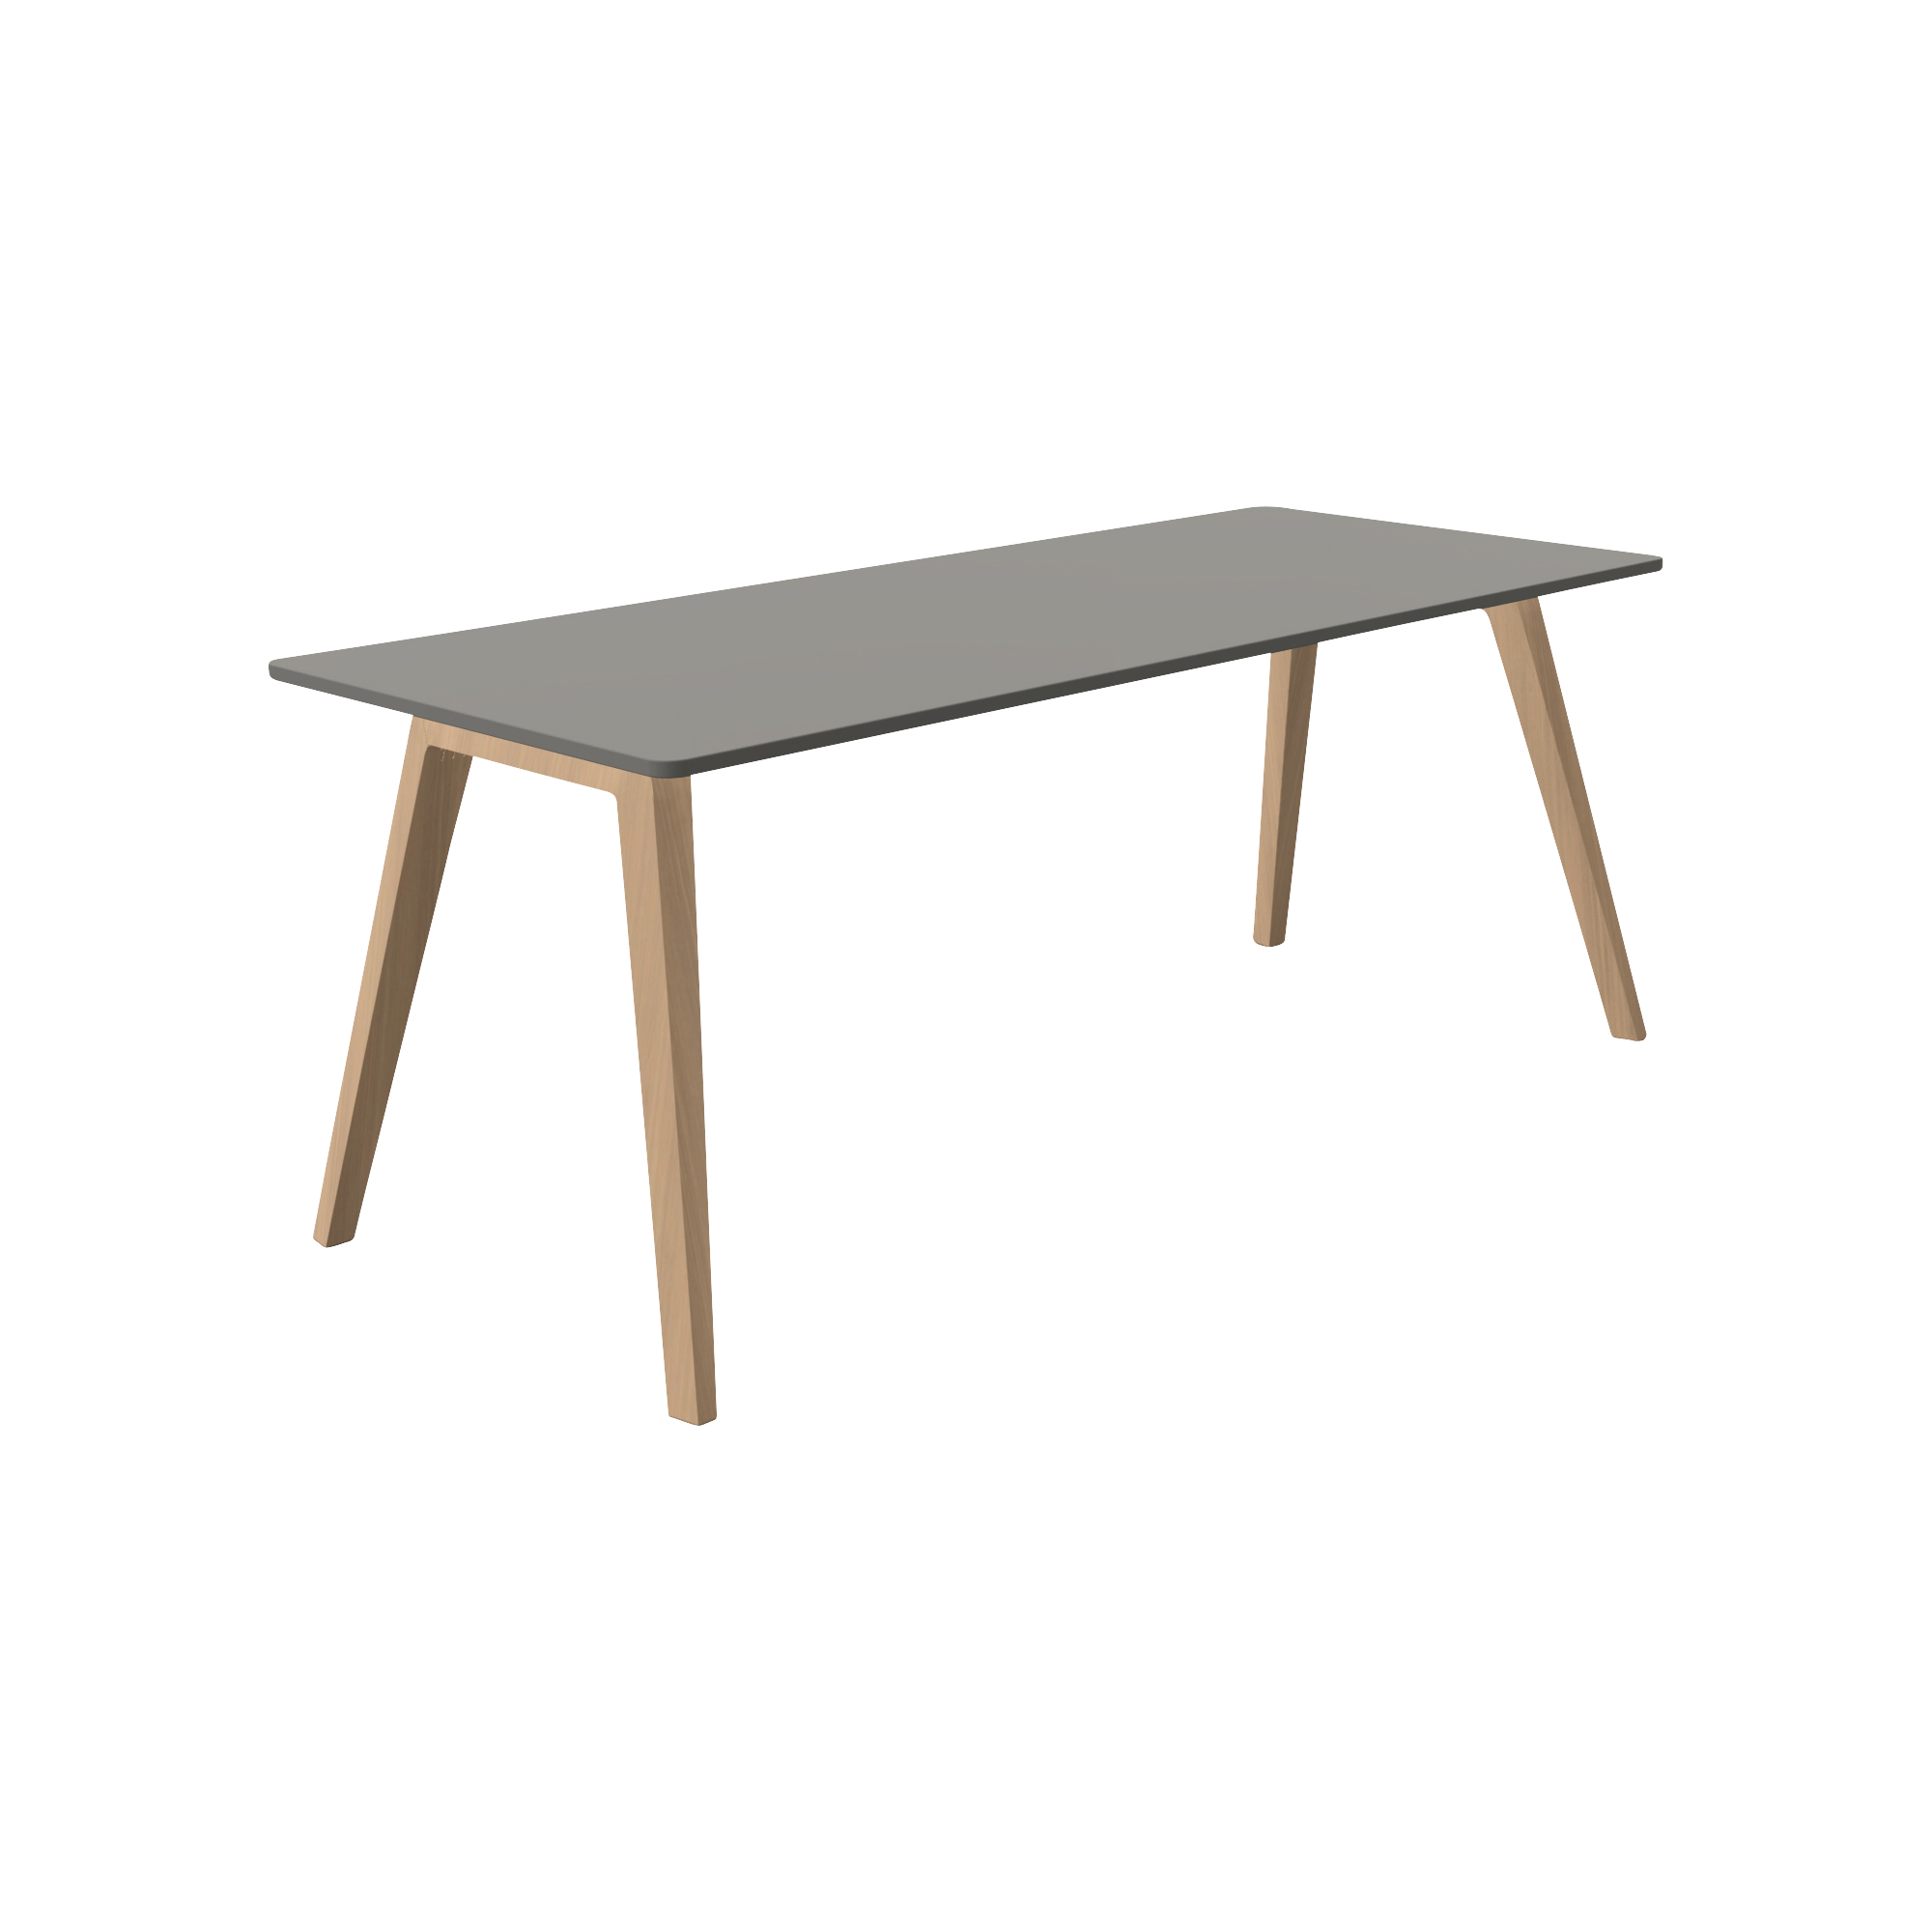 Grey rectangular table with four wooden legs